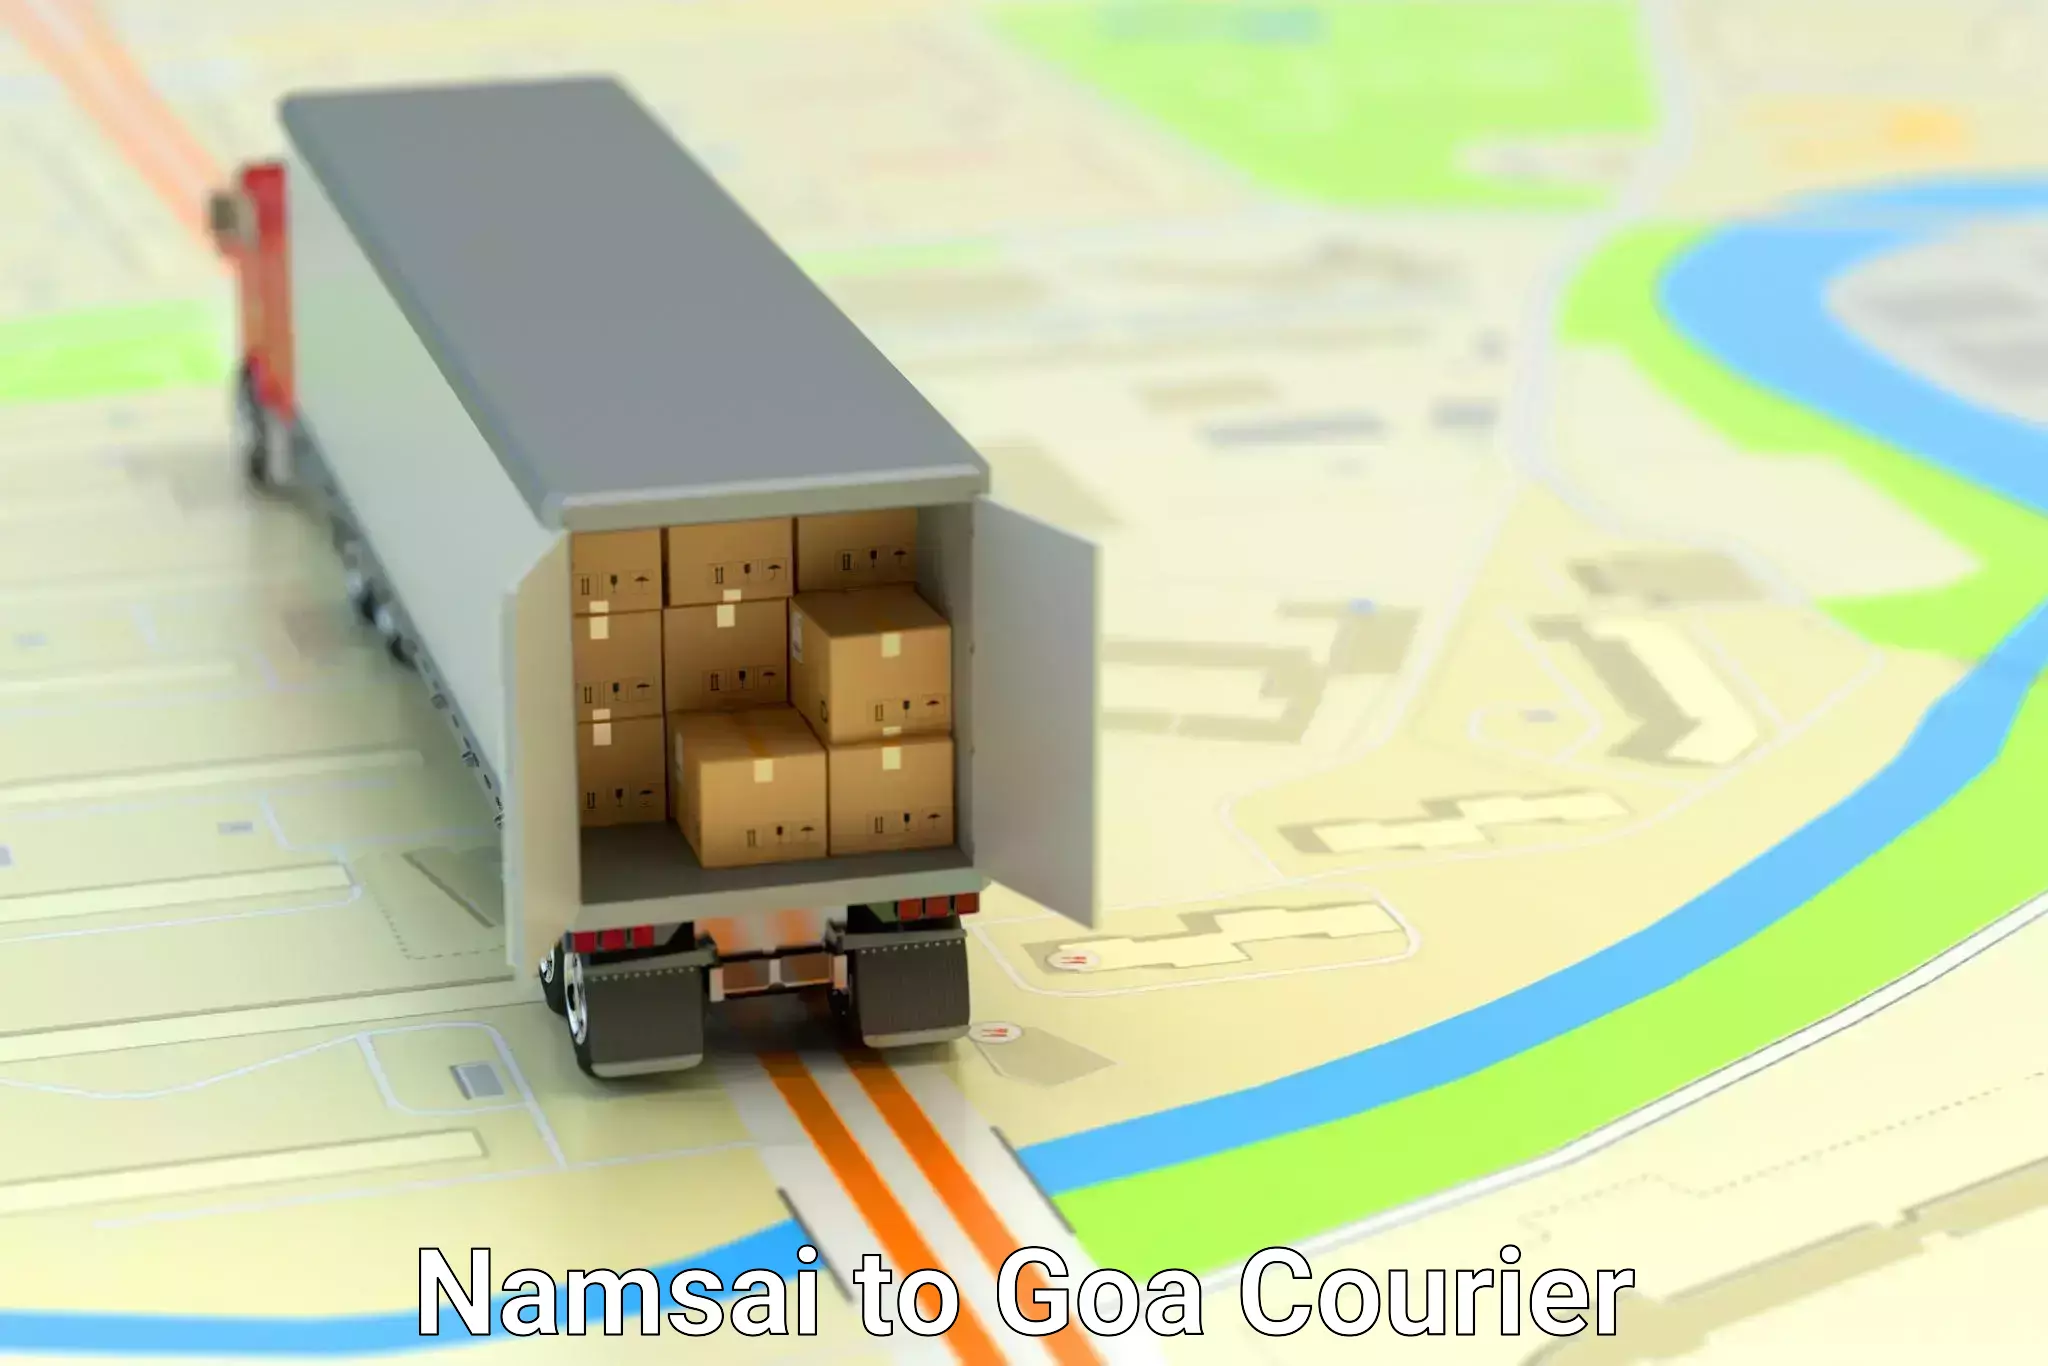 State-of-the-art courier technology Namsai to Goa University